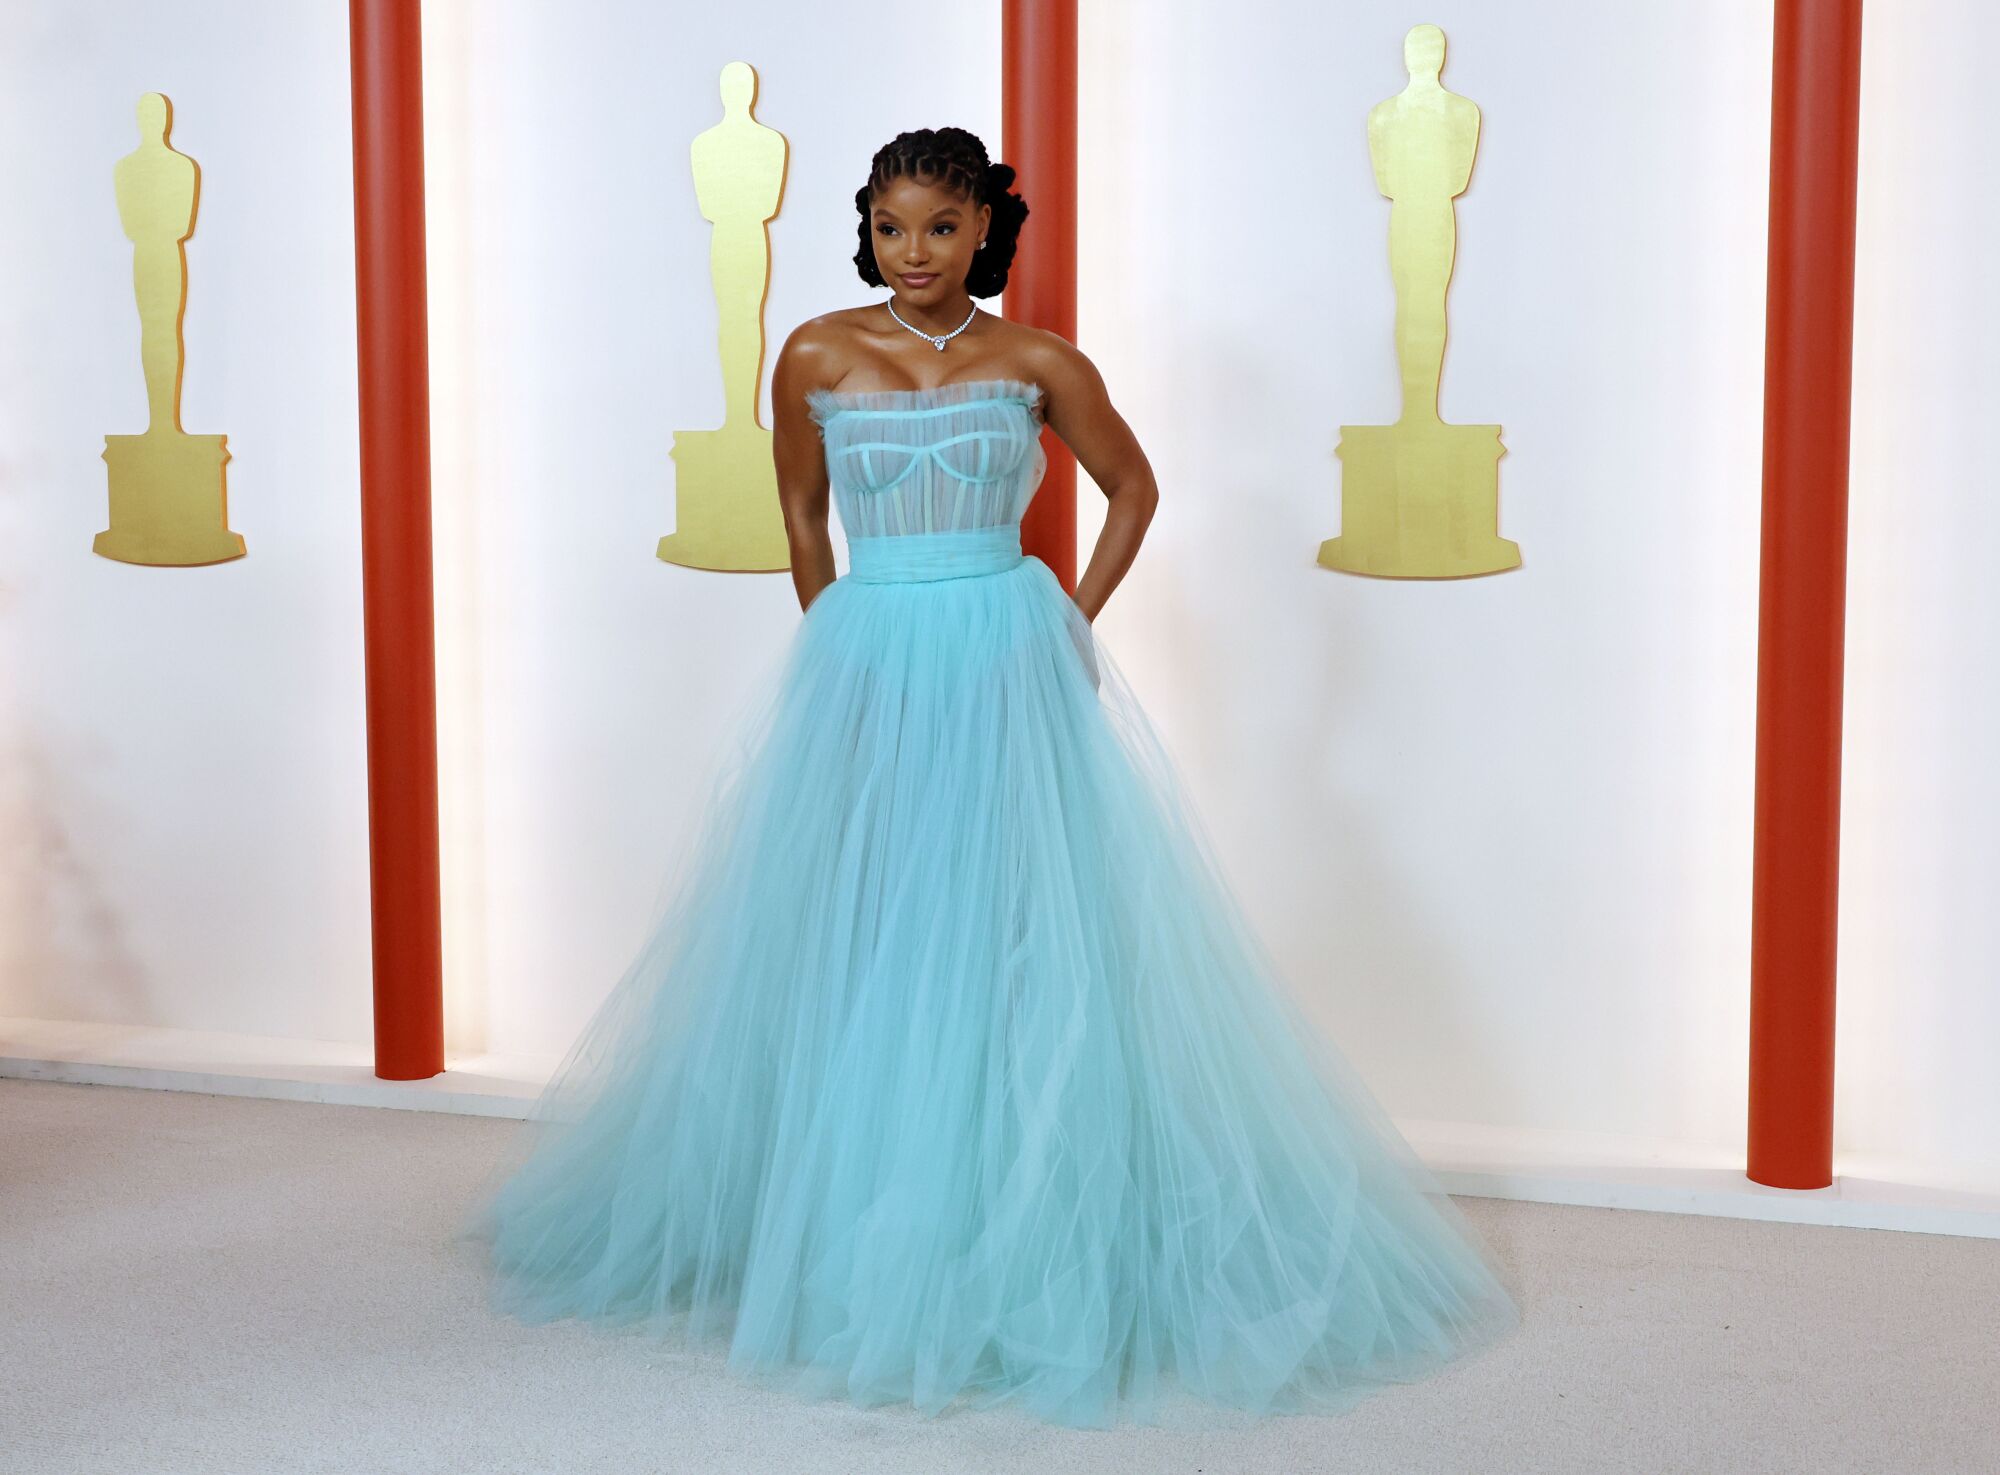 Halle Bailey in a sea-blue gown with tulle skirt.